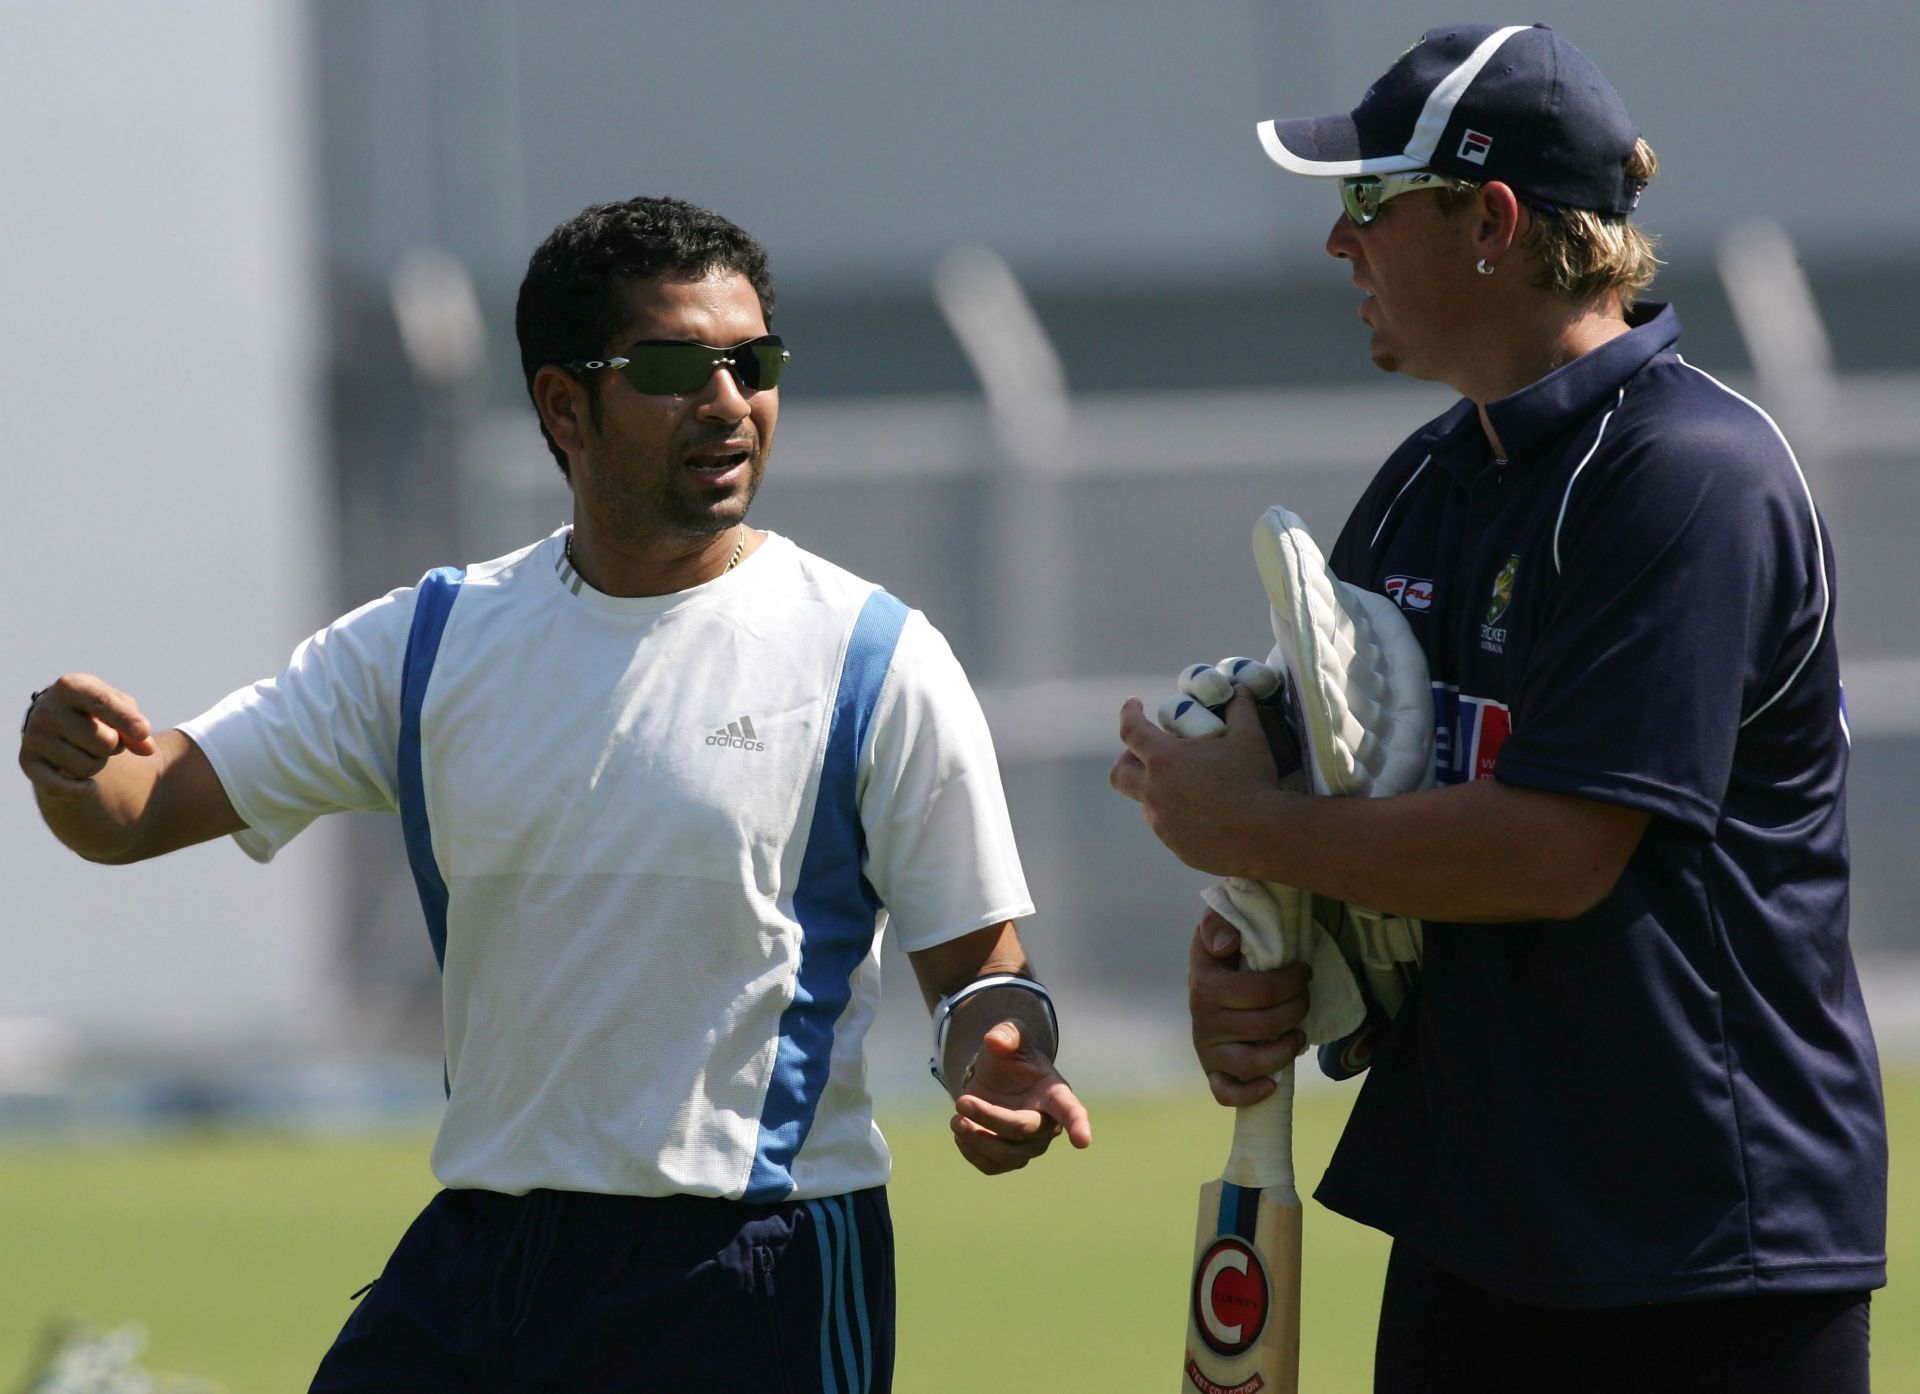 Rivals on the cricket field, Sachin Tendulkar (left) and Shane Warne shared great mutual respect for each other. In this picture, the legends are captured during training at Brabourne Stadium in September 2004 in Mumbai, India. Pic: Getty Images